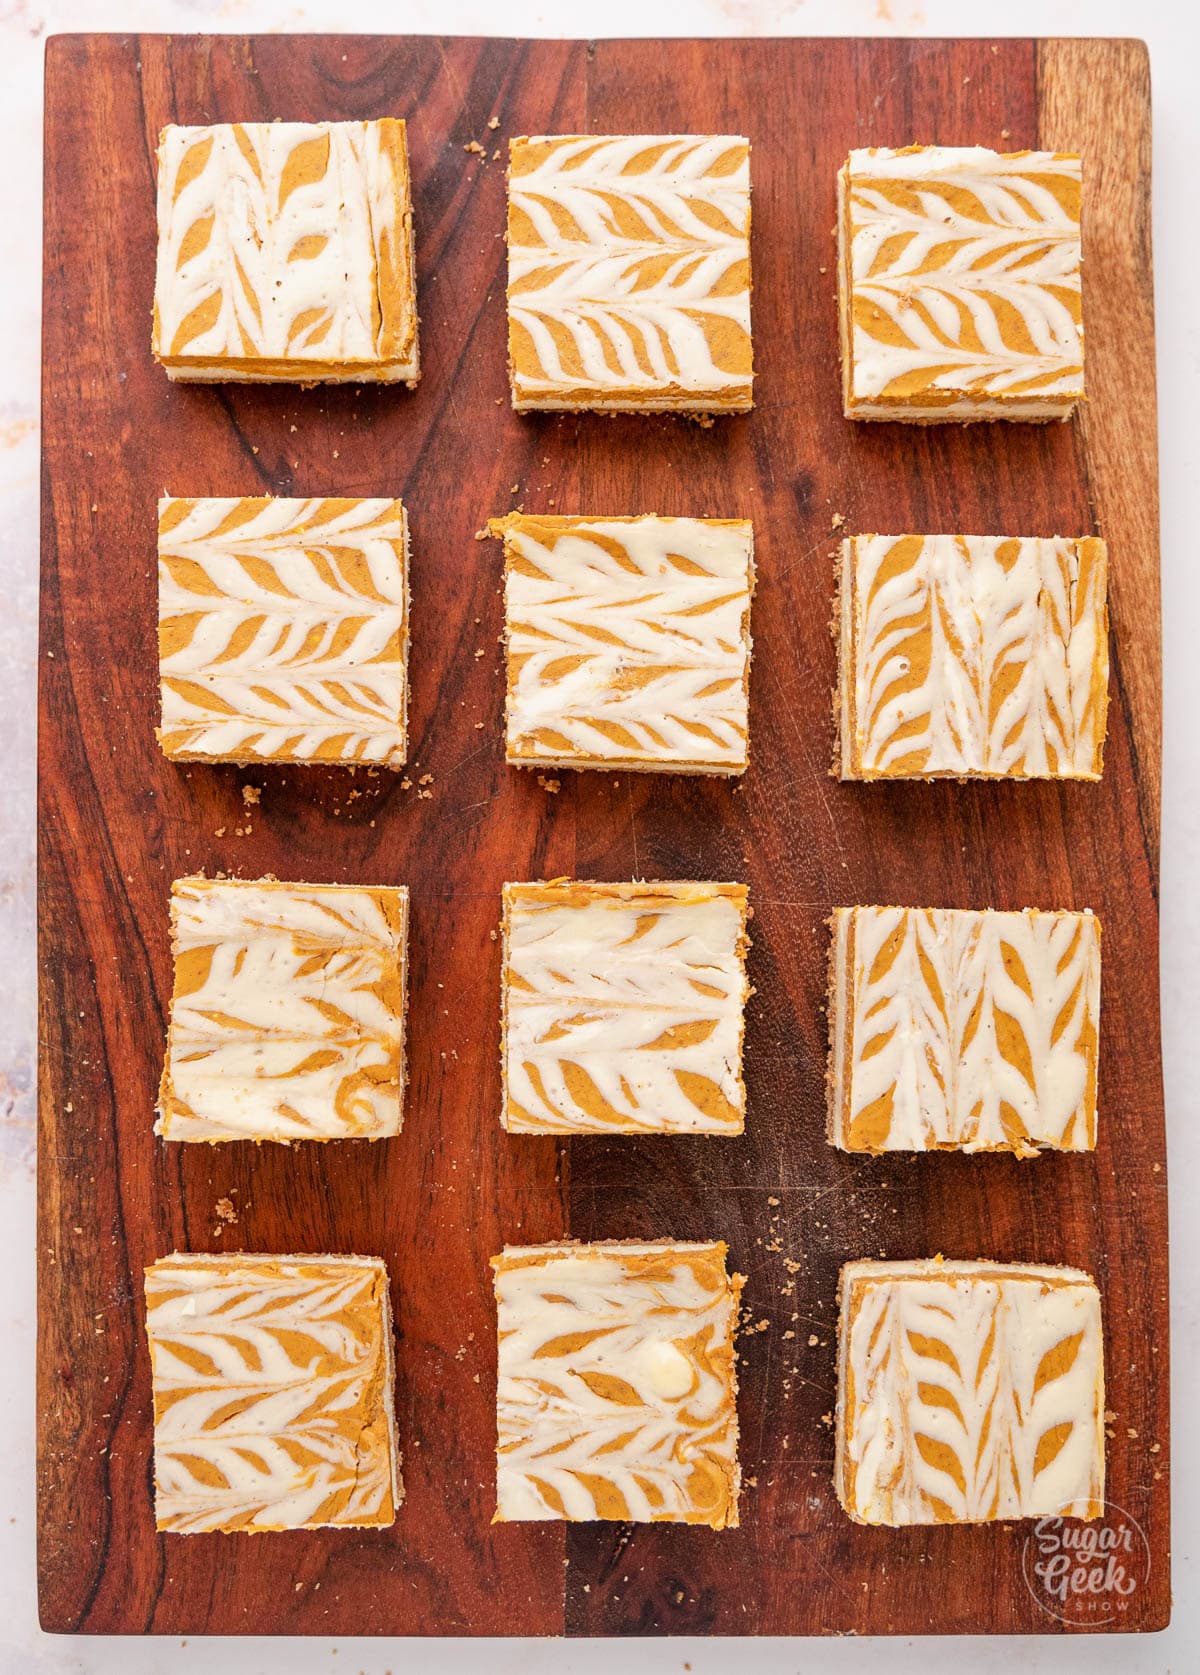 pumpkin cheesecake bars laid out on a wooden board